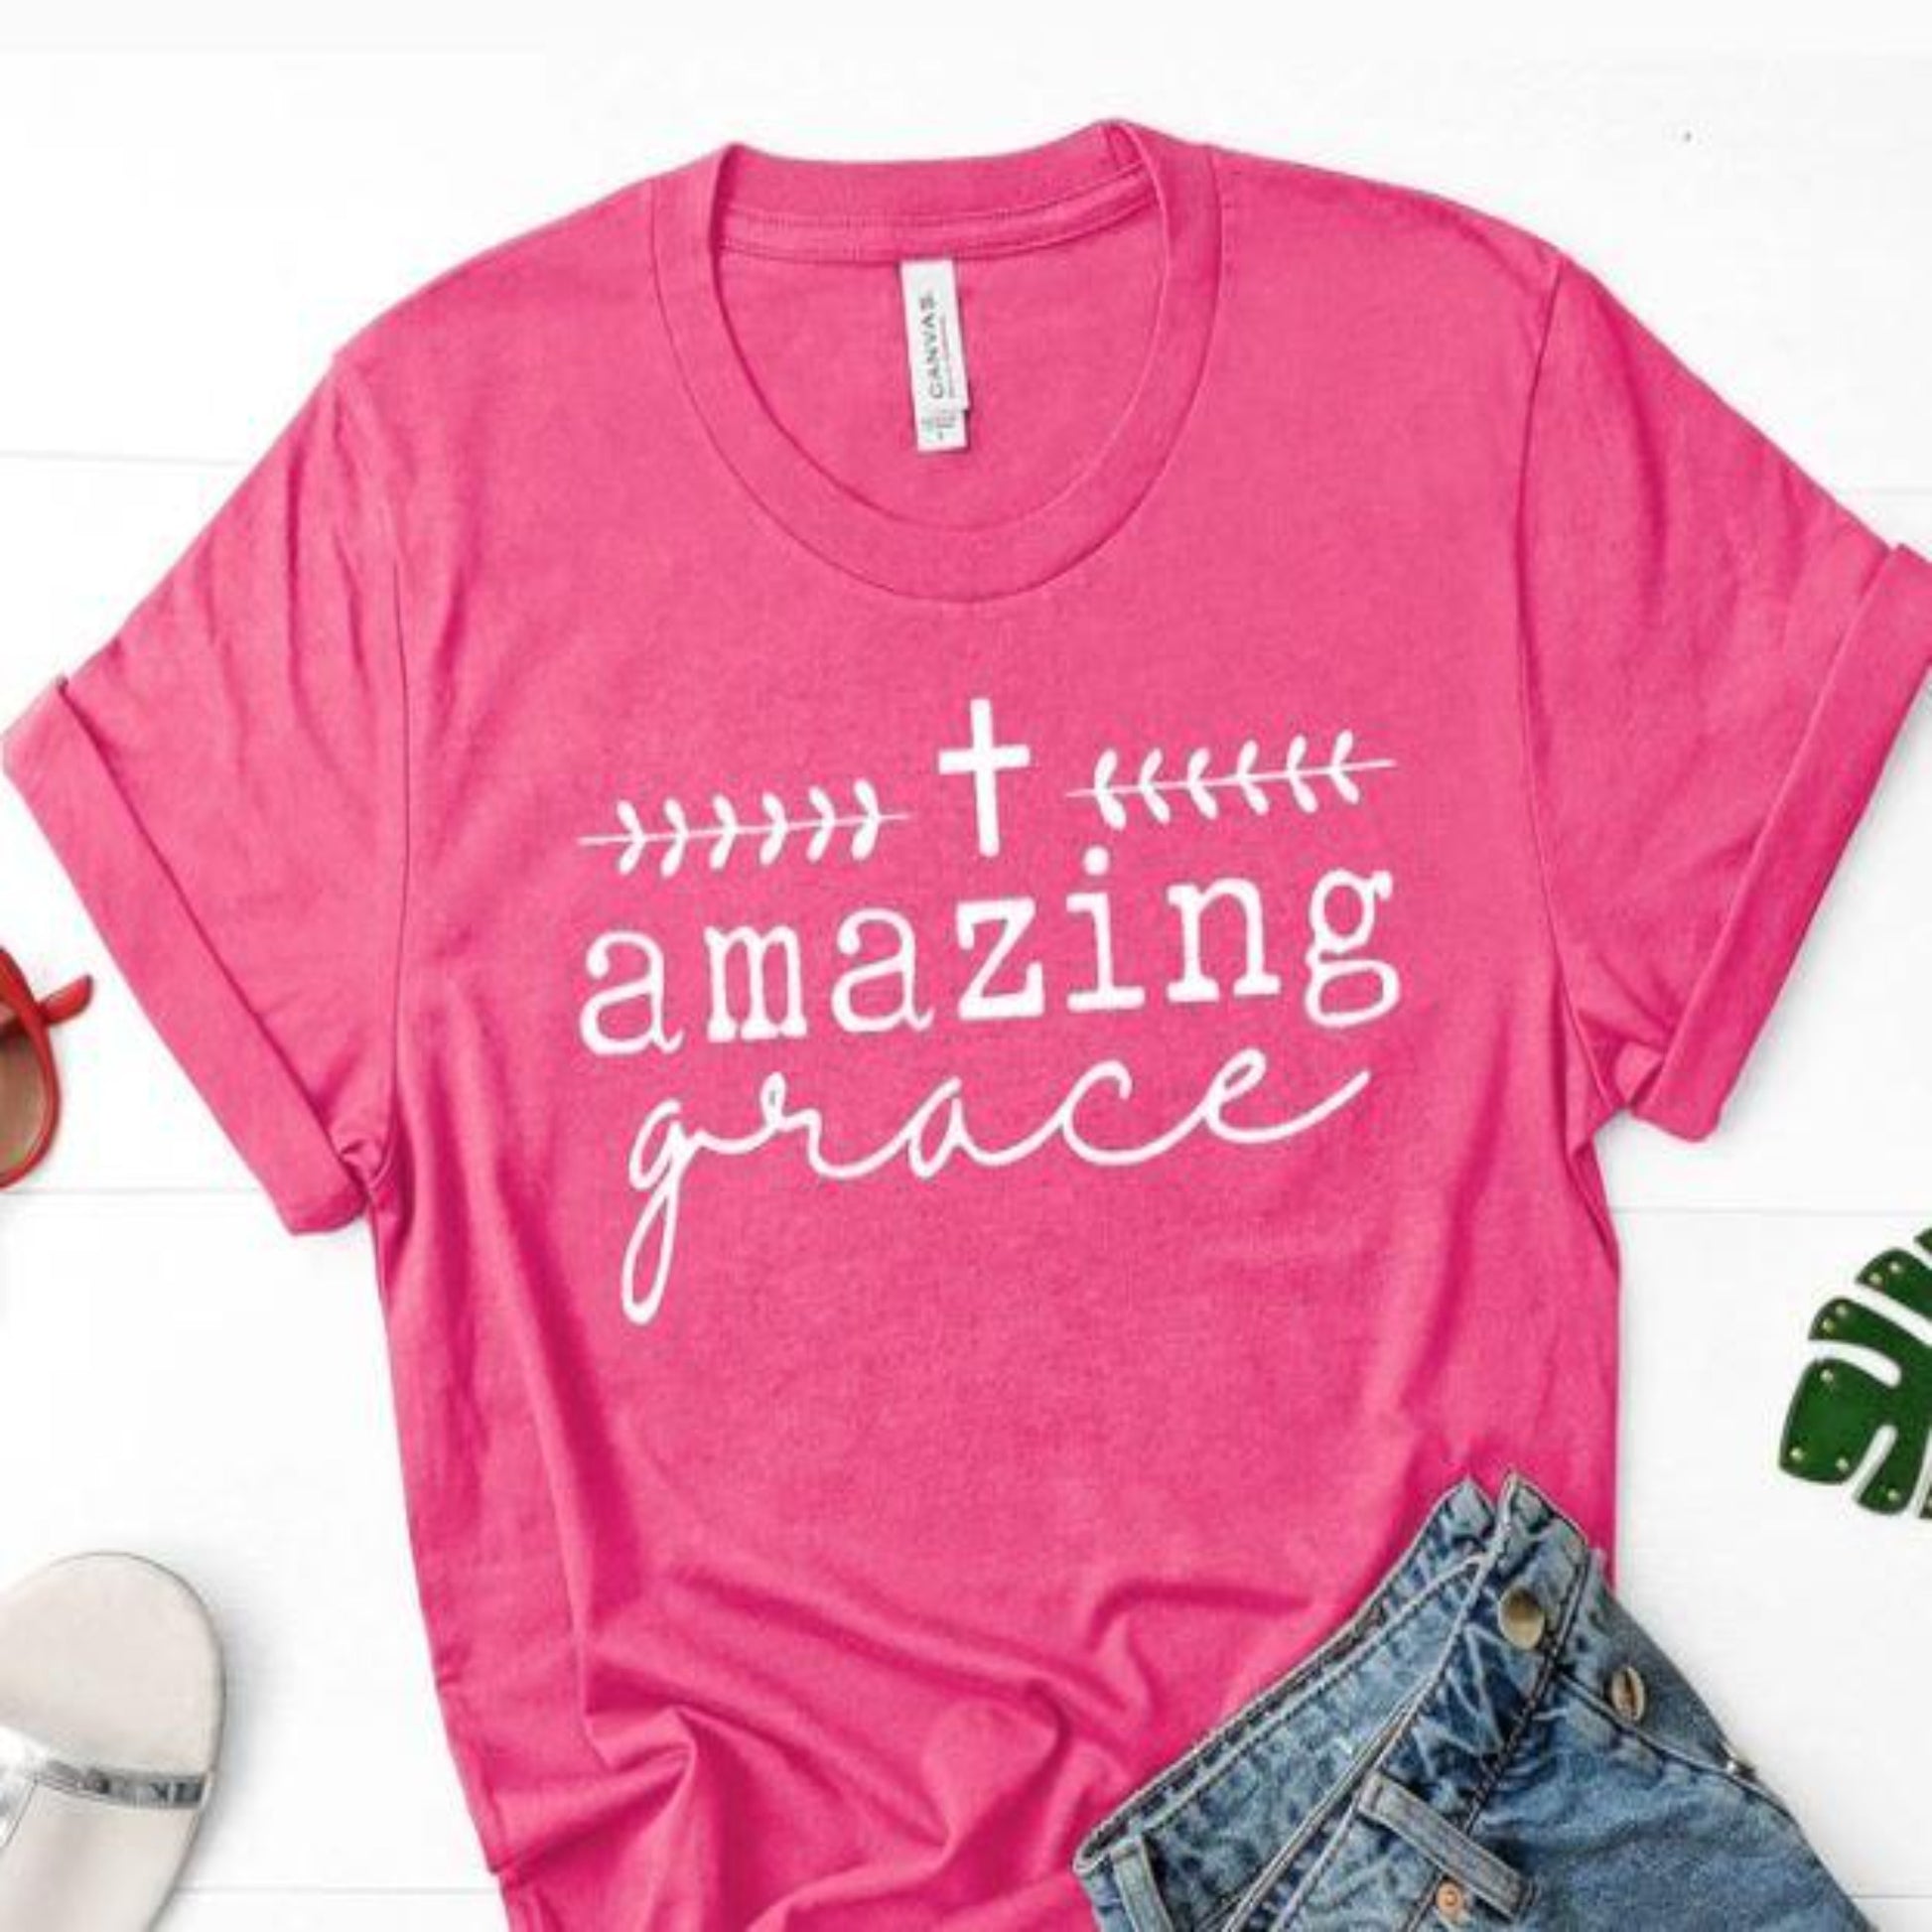 Amazing Grace t-shirt Amazing specialty tee comfortable wear everyday shirt